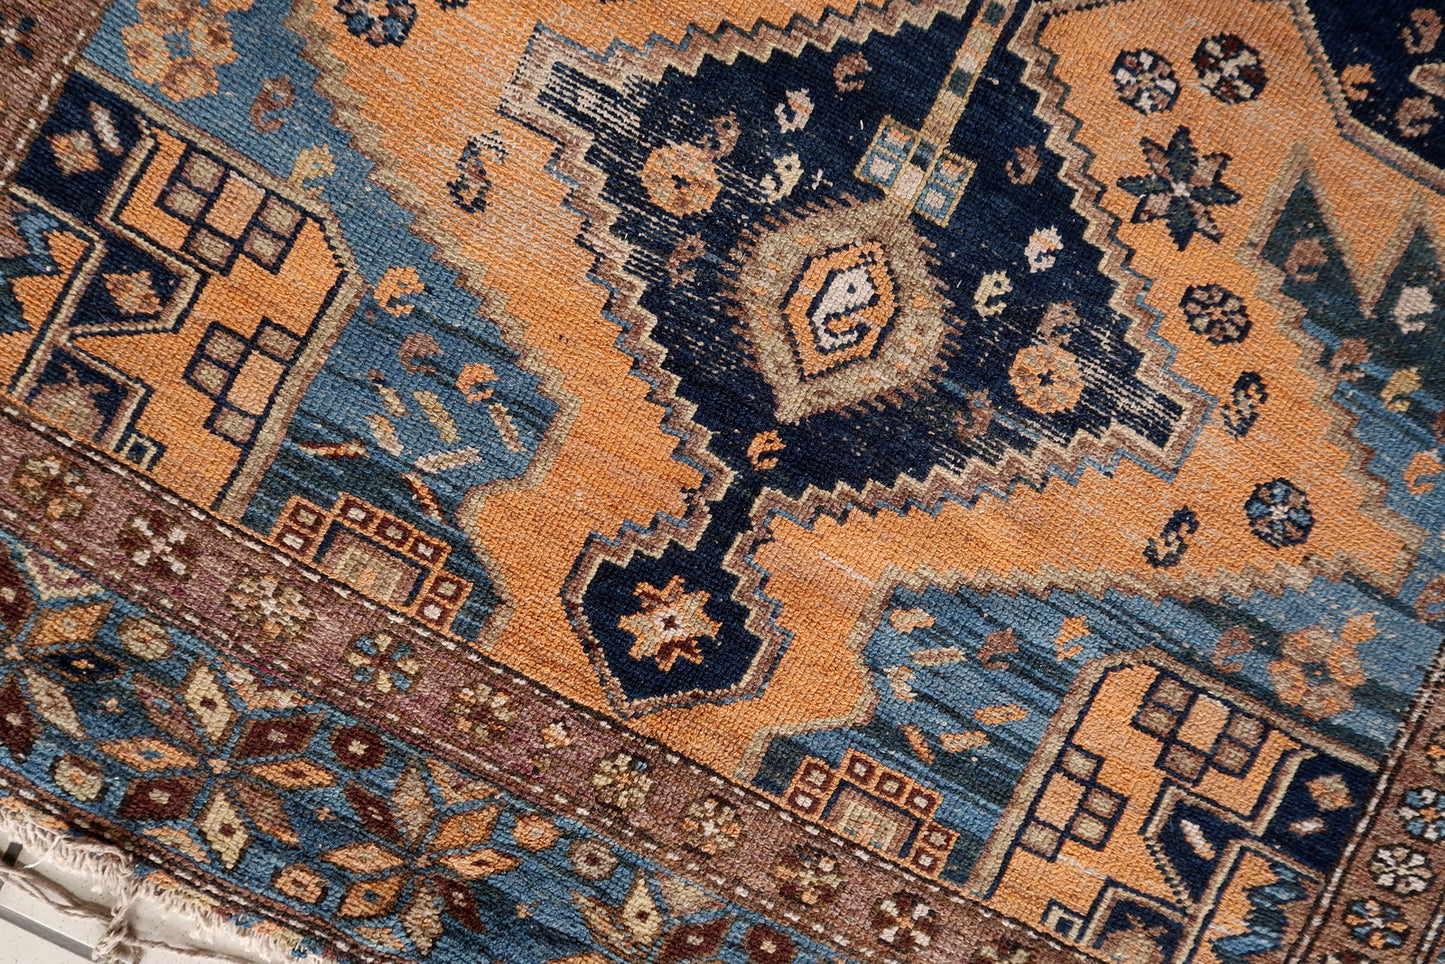 Close-up of faded colors on Handmade Antique Caucasian Shirvan Rug - Detailed view showcasing the gracefully faded deep blues, warm oranges, and neutral tones.